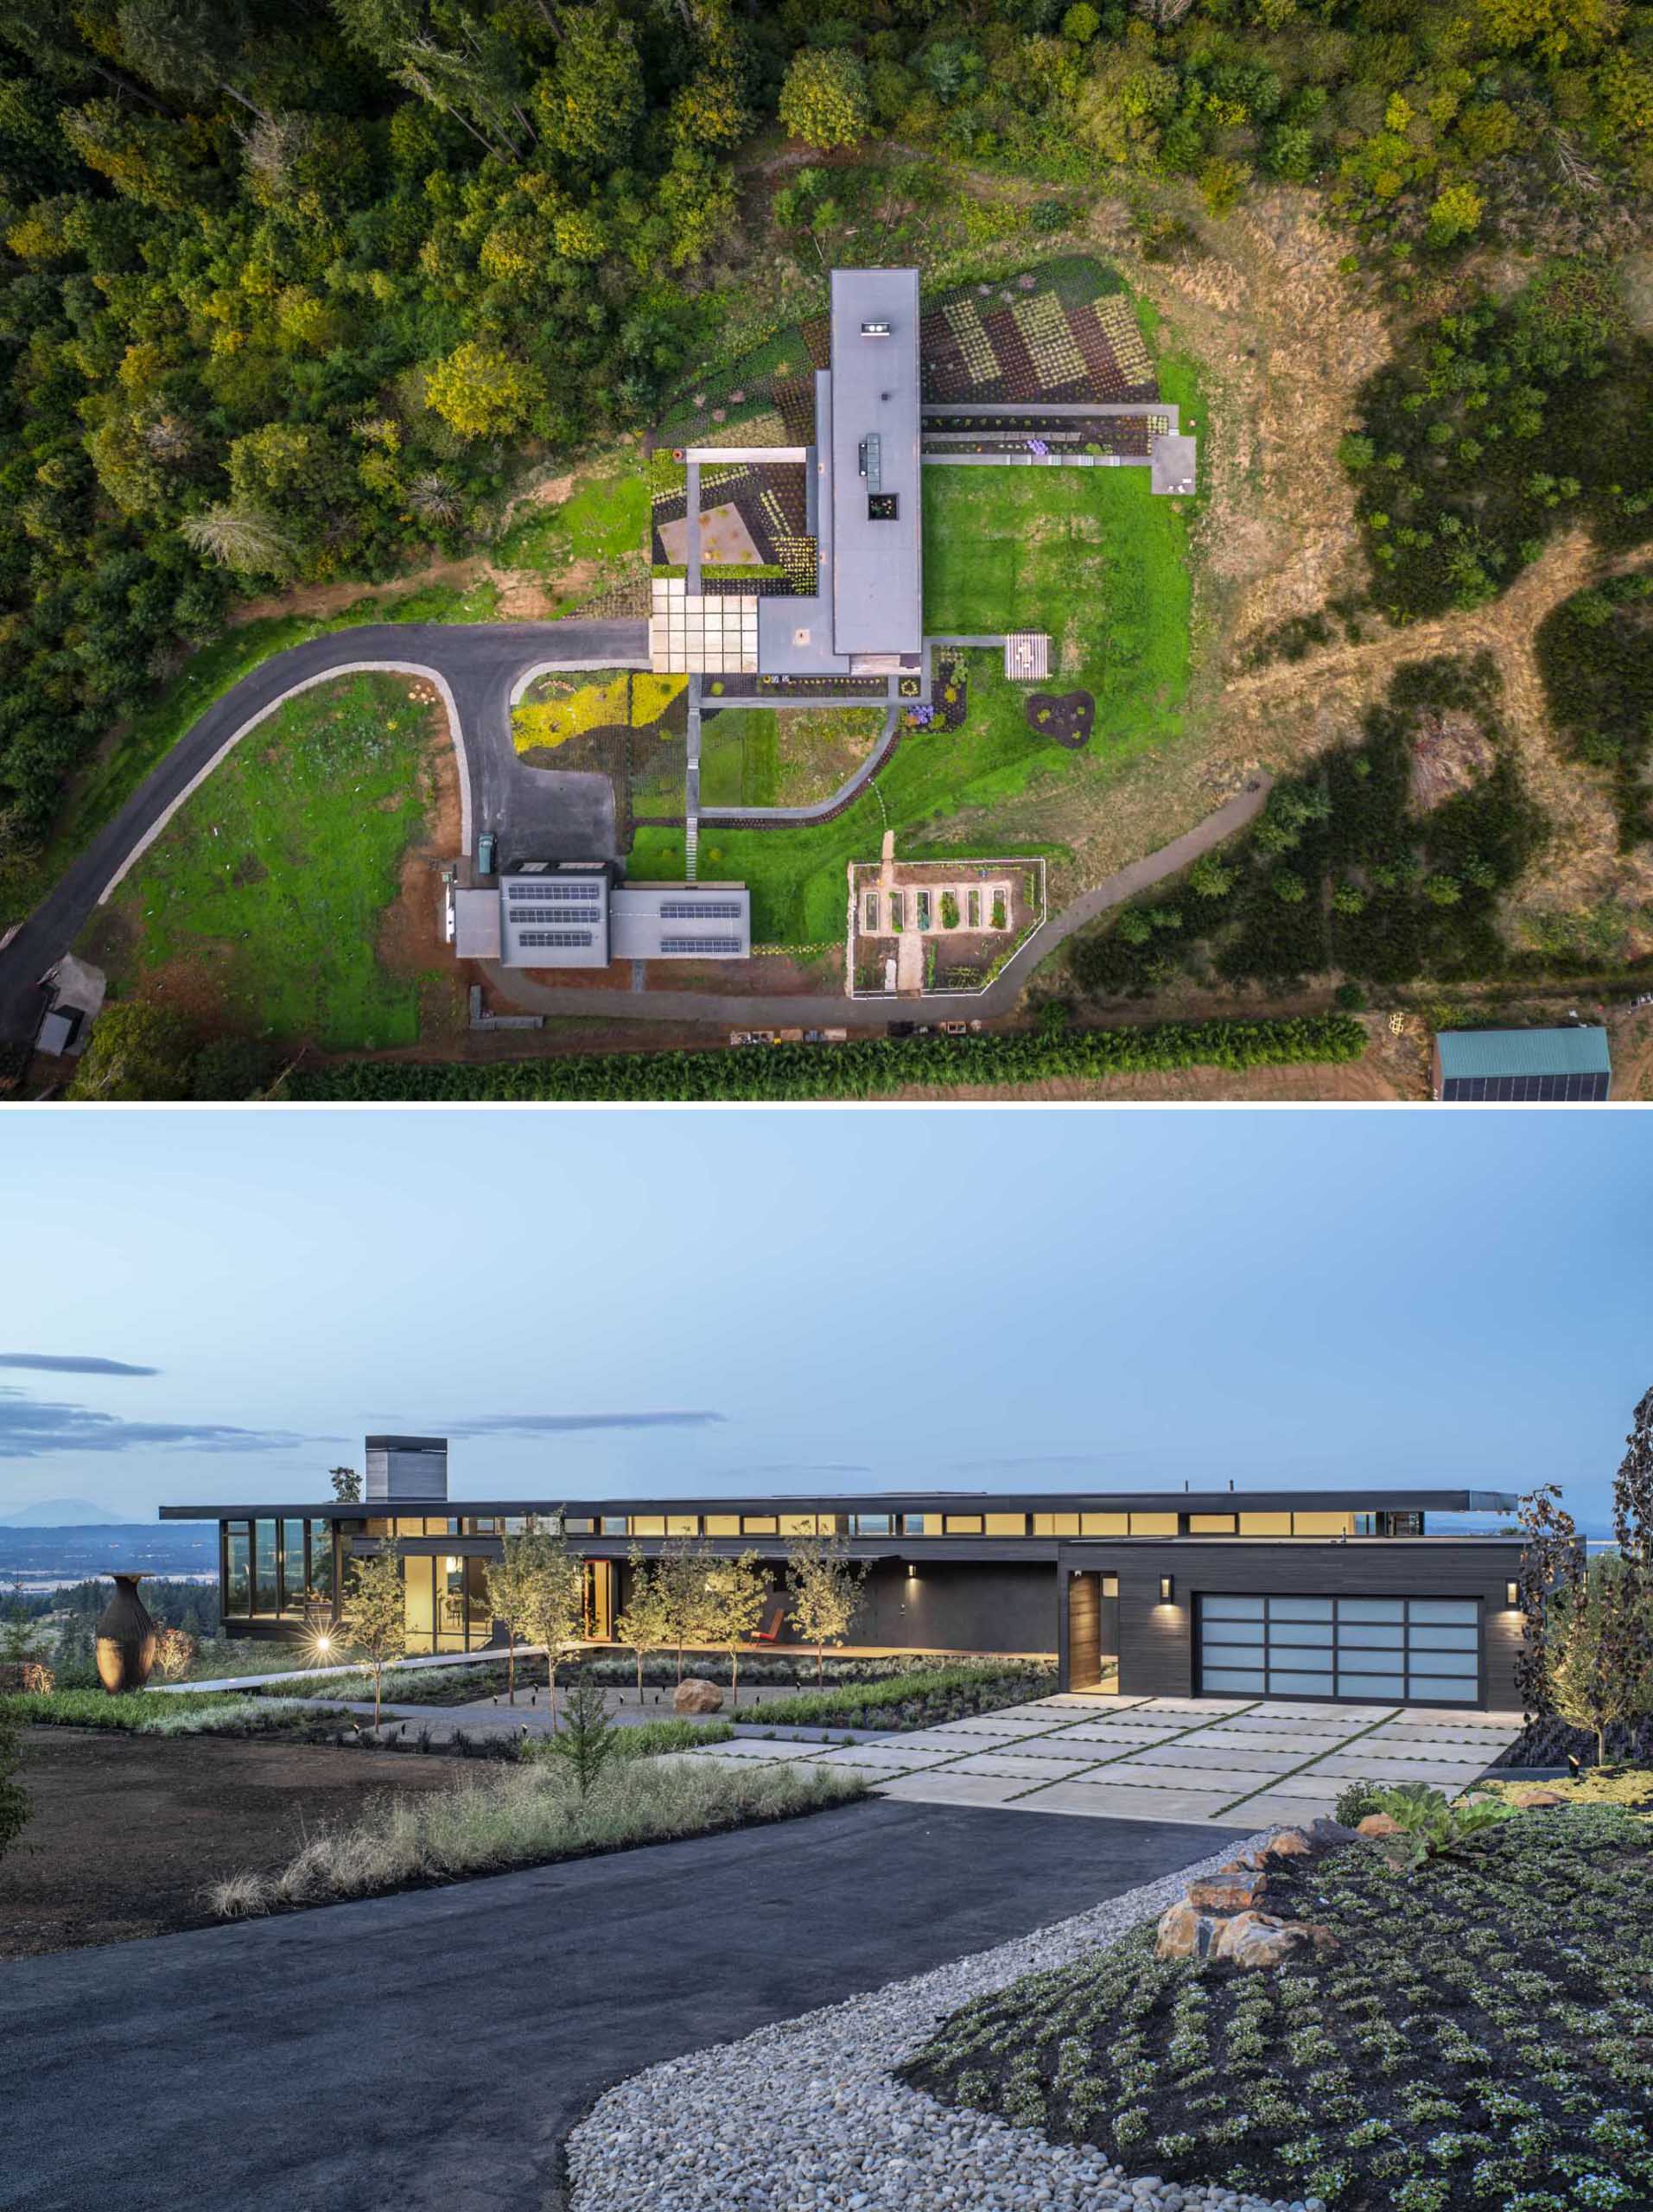 Scott Edwards Architecture has designed a new home in Yamhill County, Oregon, that's perched on a site offering expansive views of five different mountains.